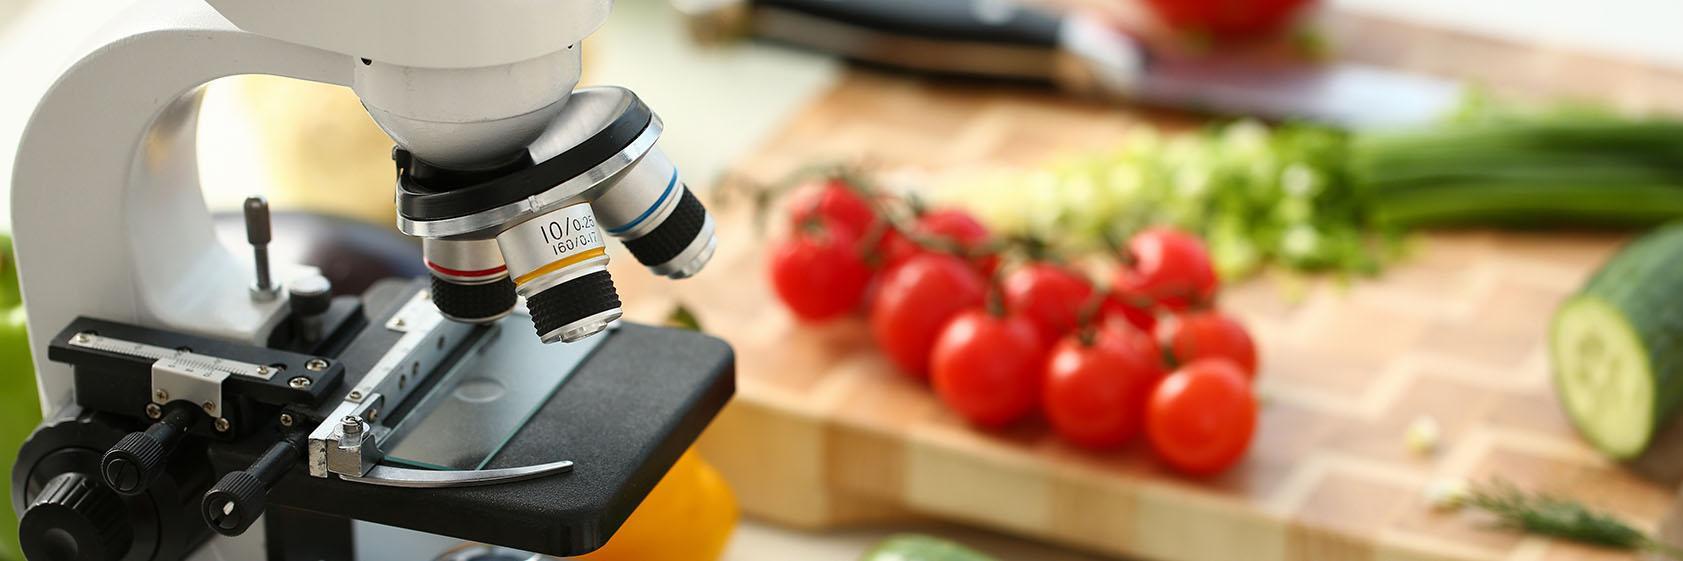 background image. Microscope and vegetables